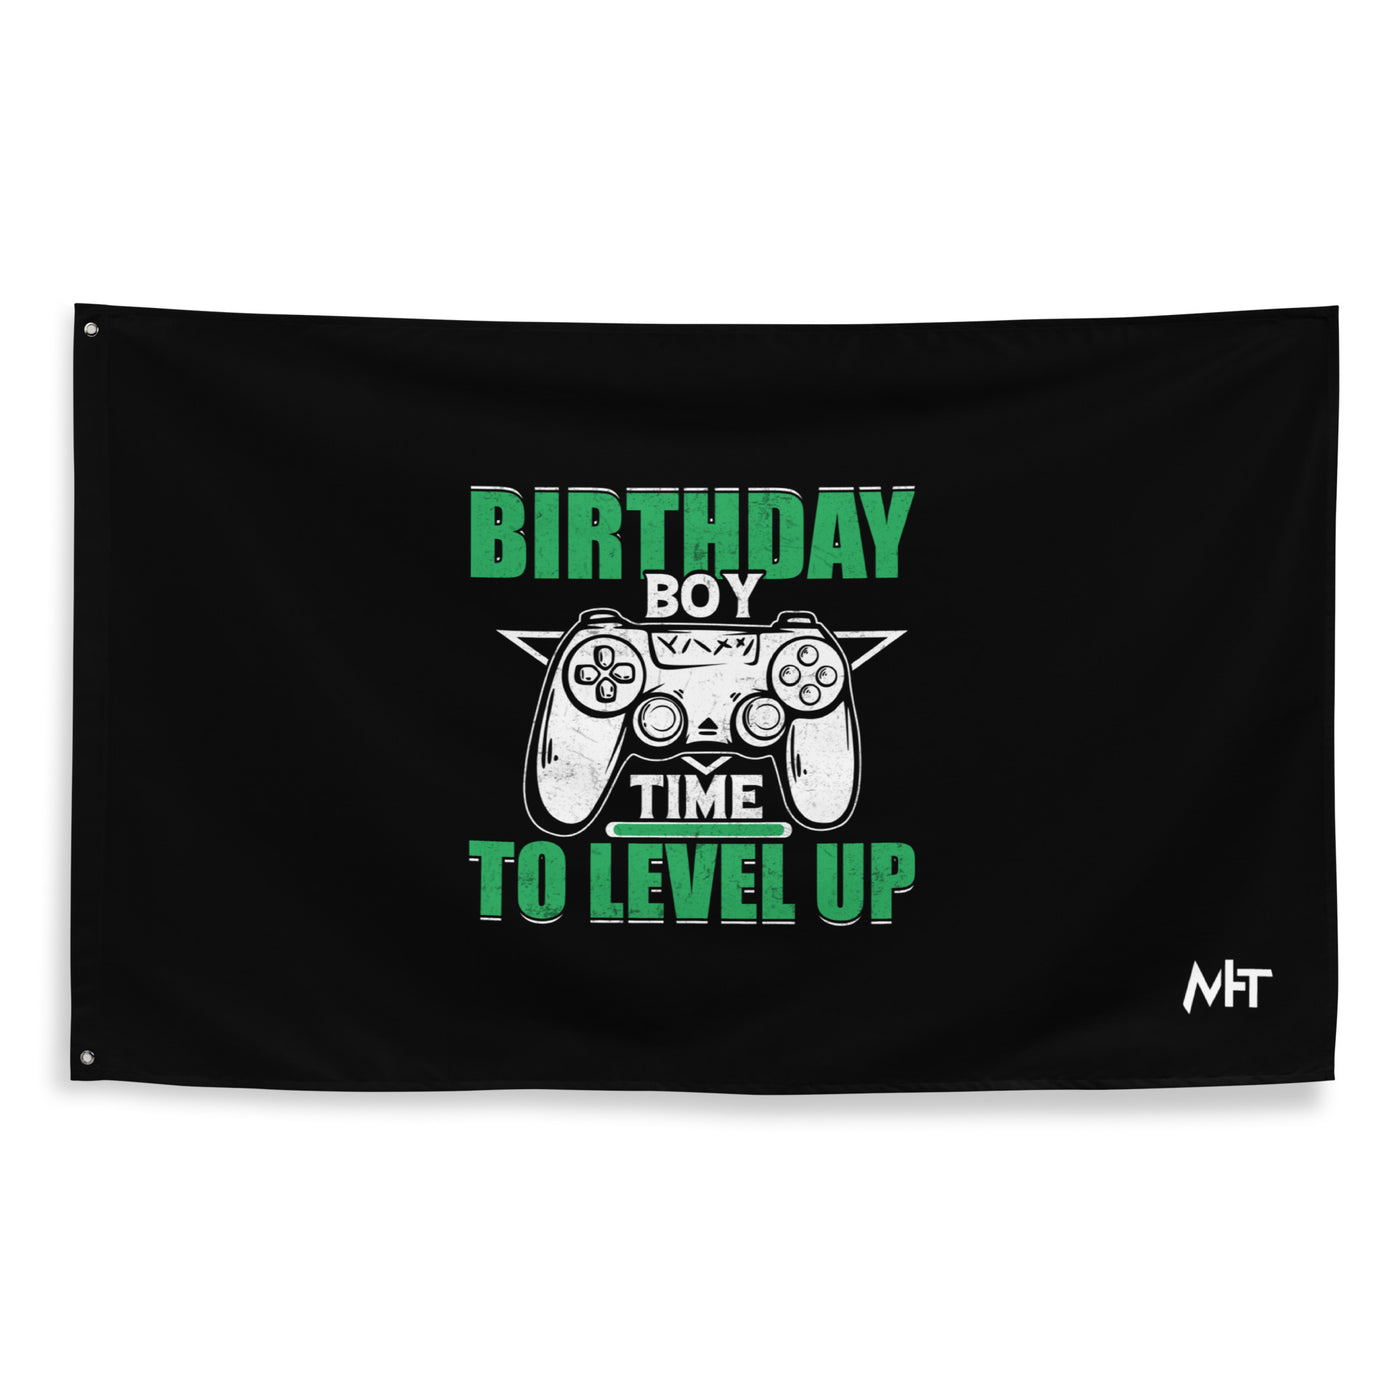 Birthday Boy Time to Level Up Flag